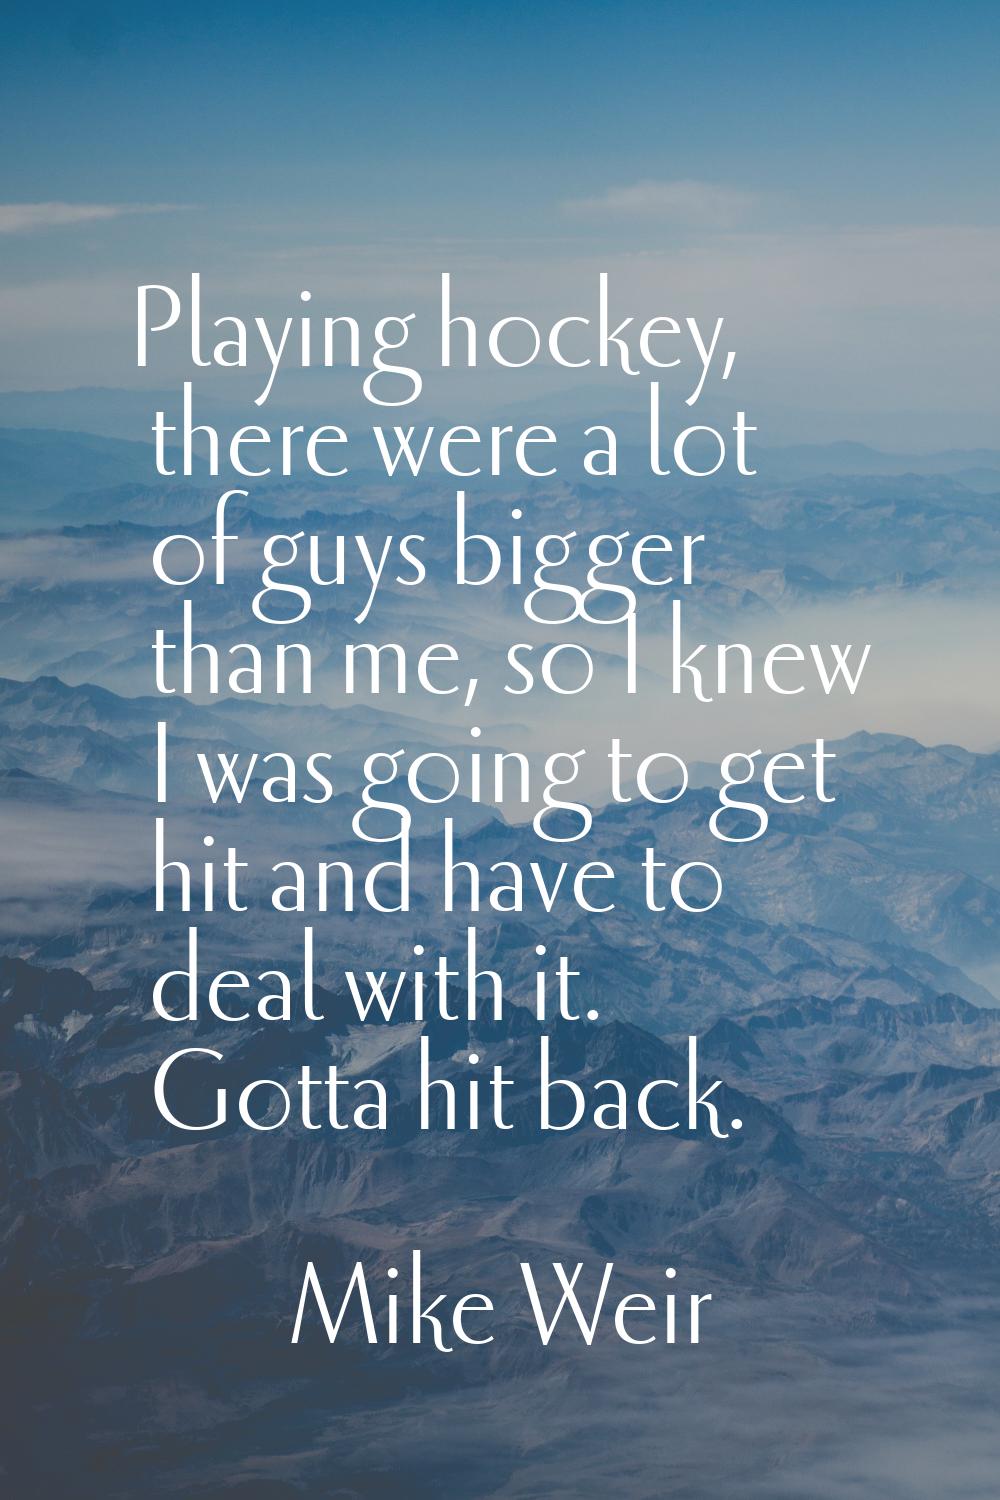 Playing hockey, there were a lot of guys bigger than me, so I knew I was going to get hit and have 